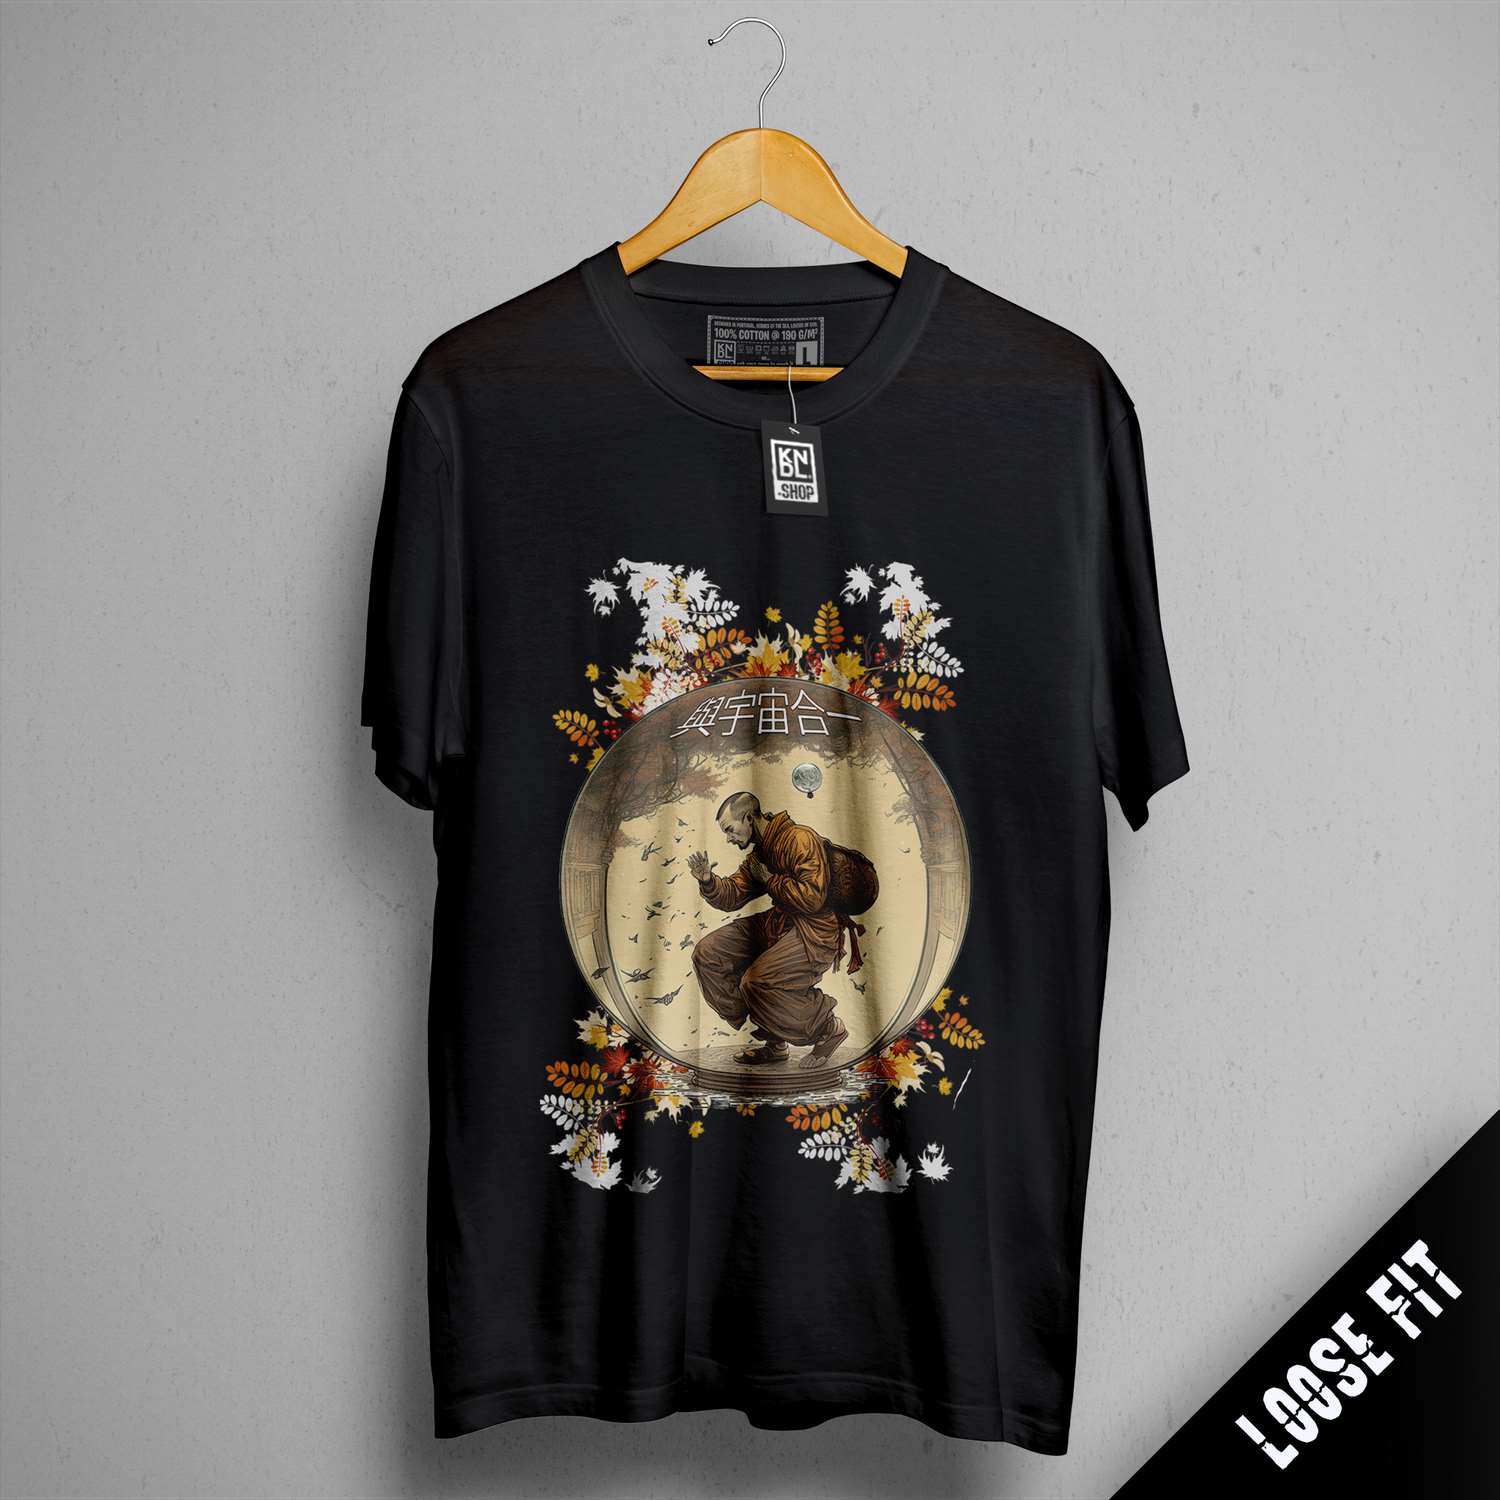 a black t - shirt with a picture of a bear on it